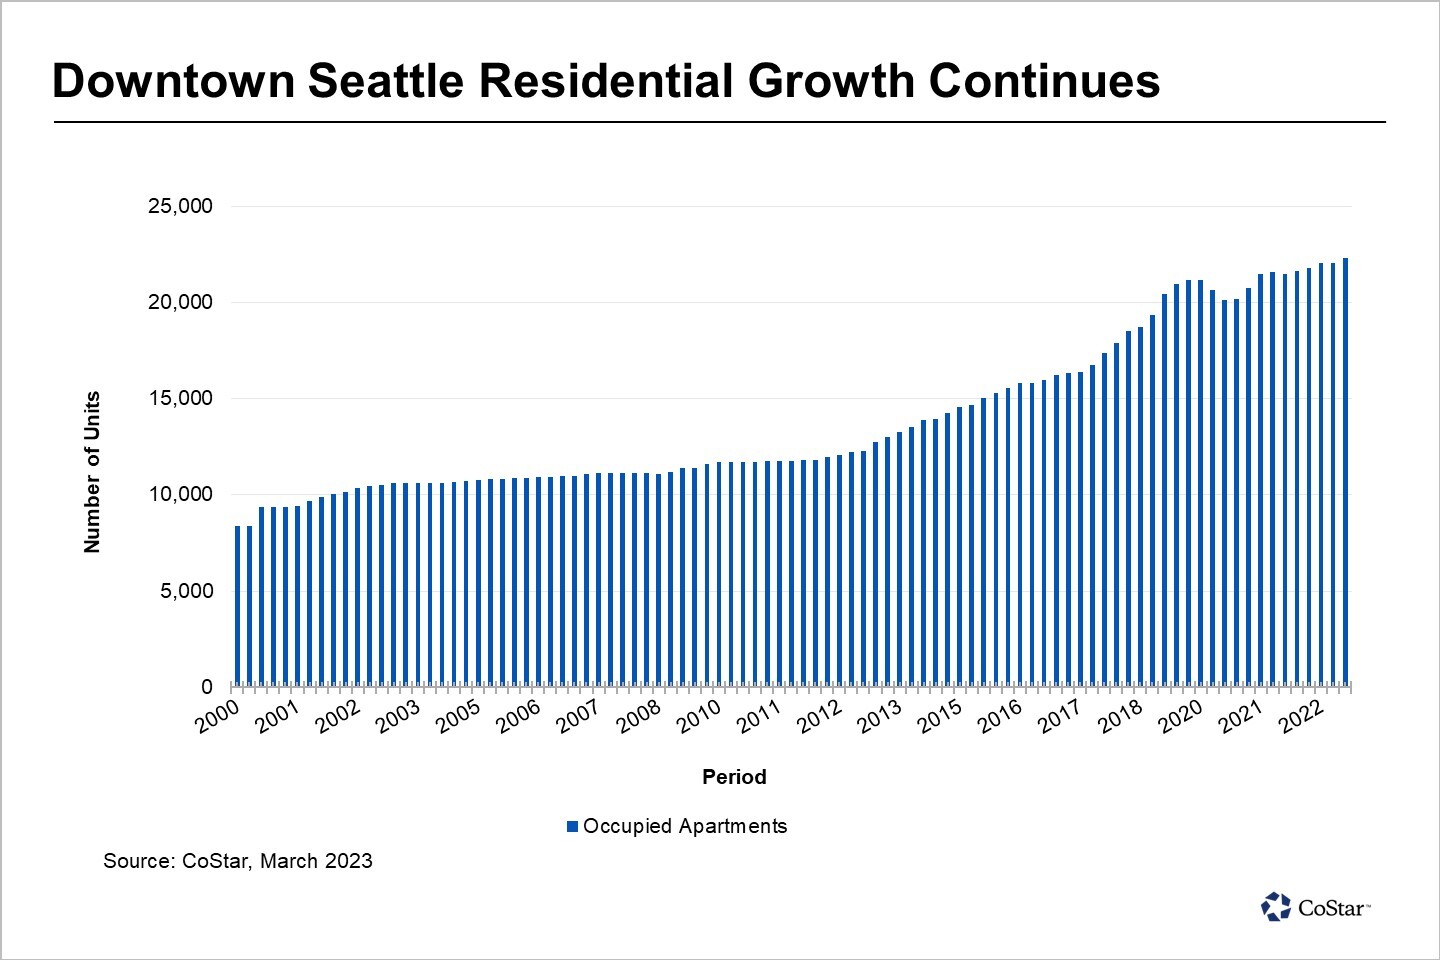 Downtown Seattle Remains Fastest-Growing Area of the Region